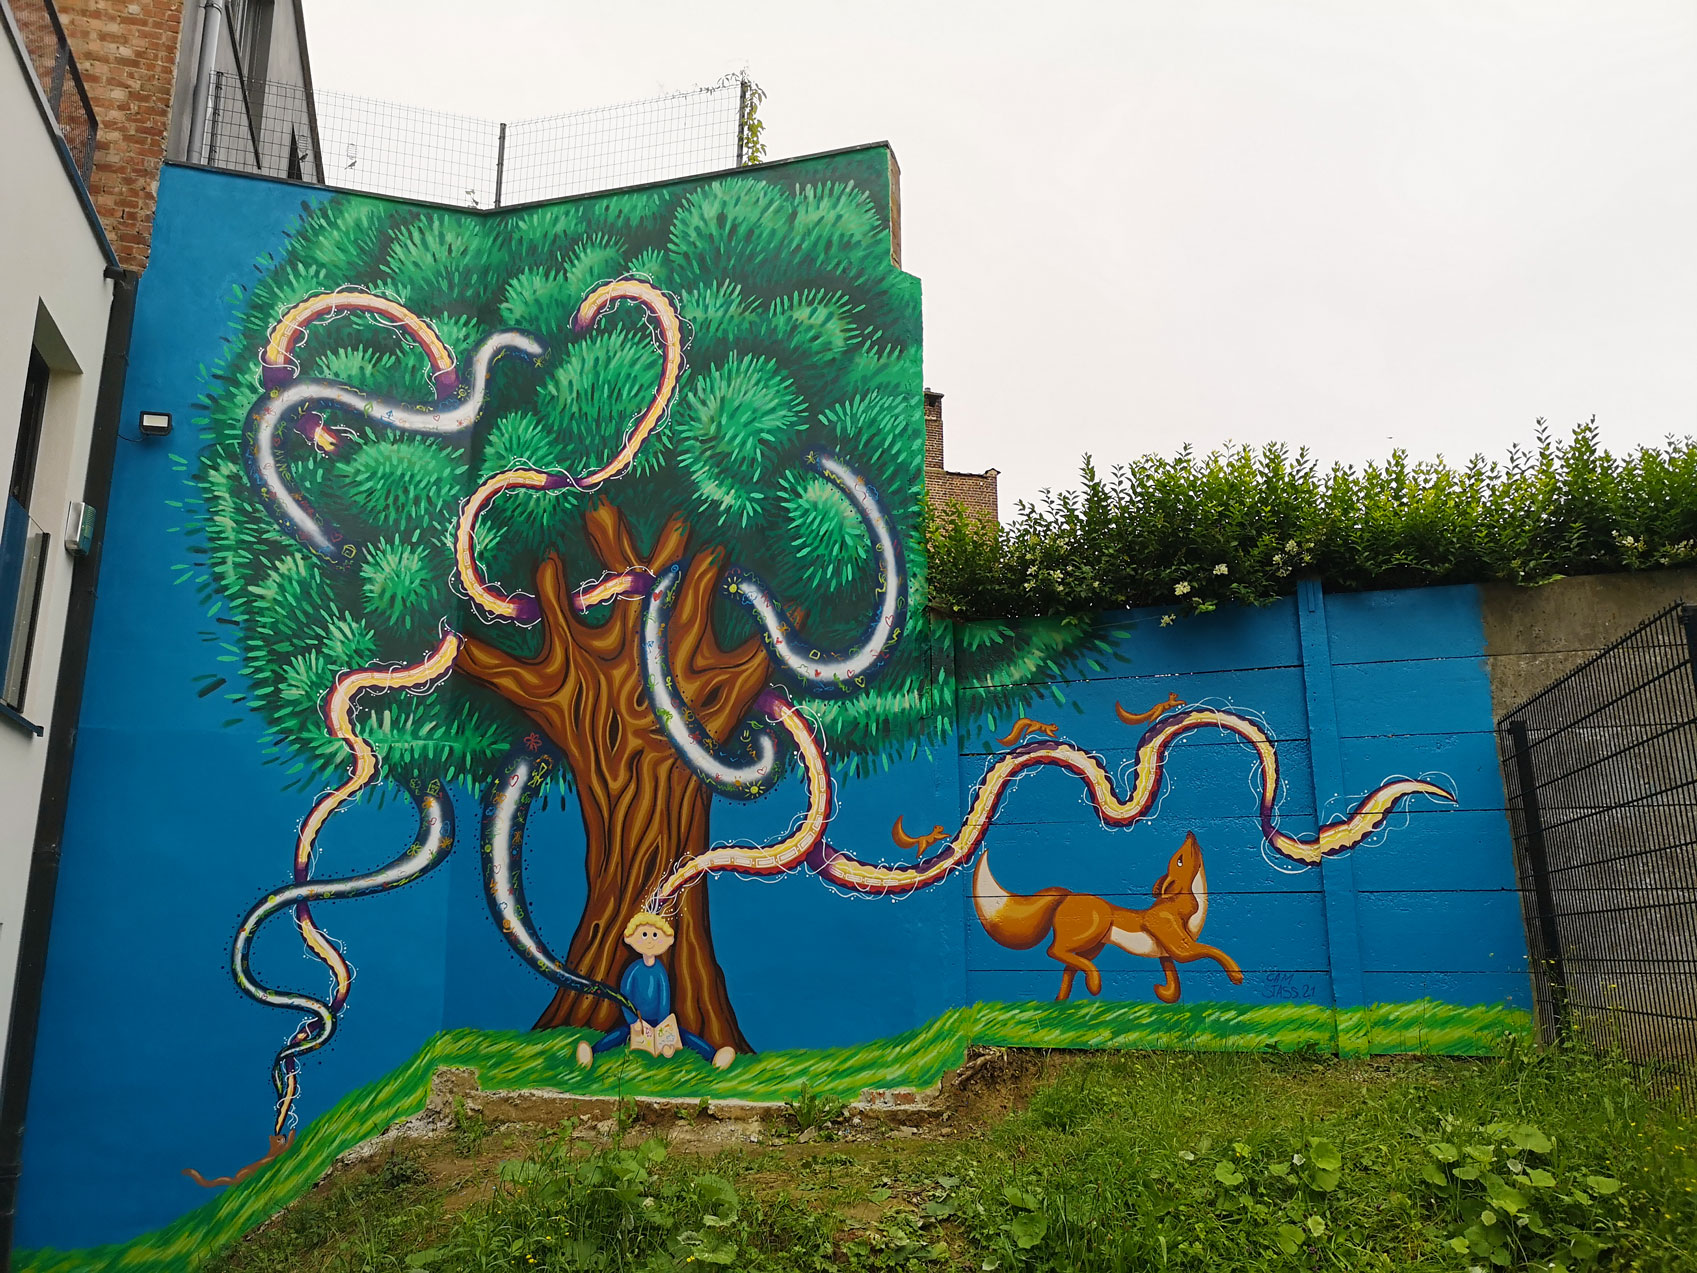 A Kid, Art and Nature, mural